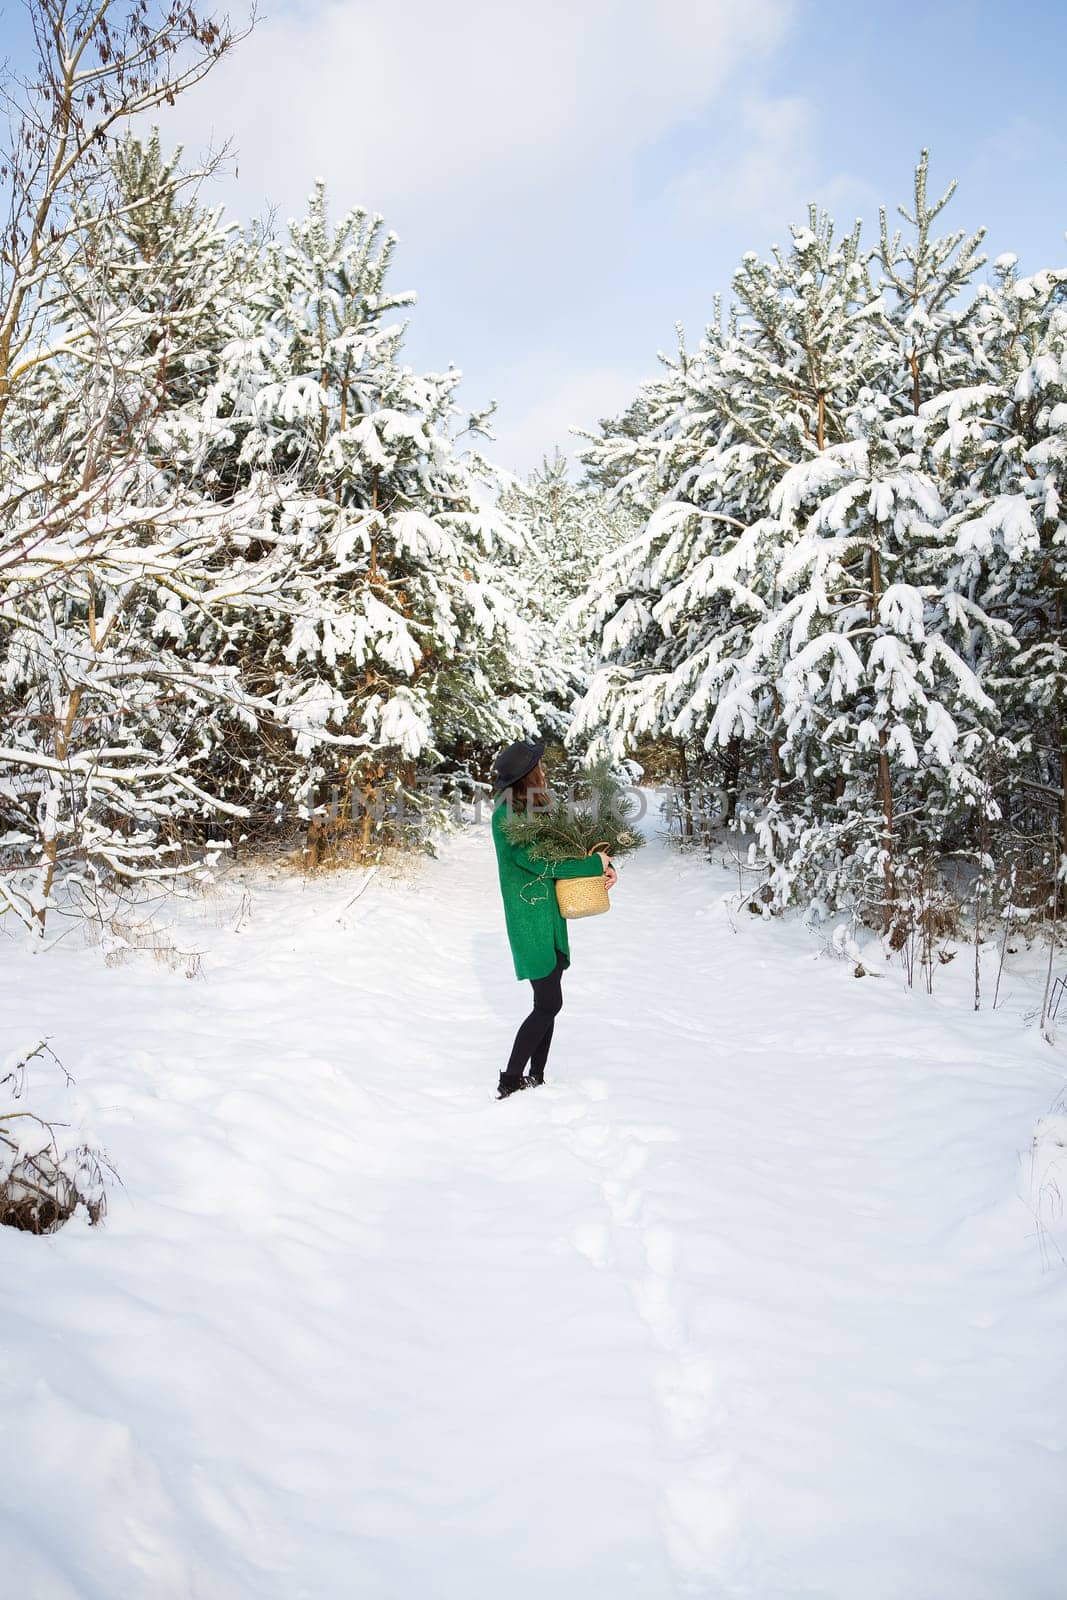 A young beautiful girl in a green sweater and hat stands in the winter forest along with a basket with pine branches